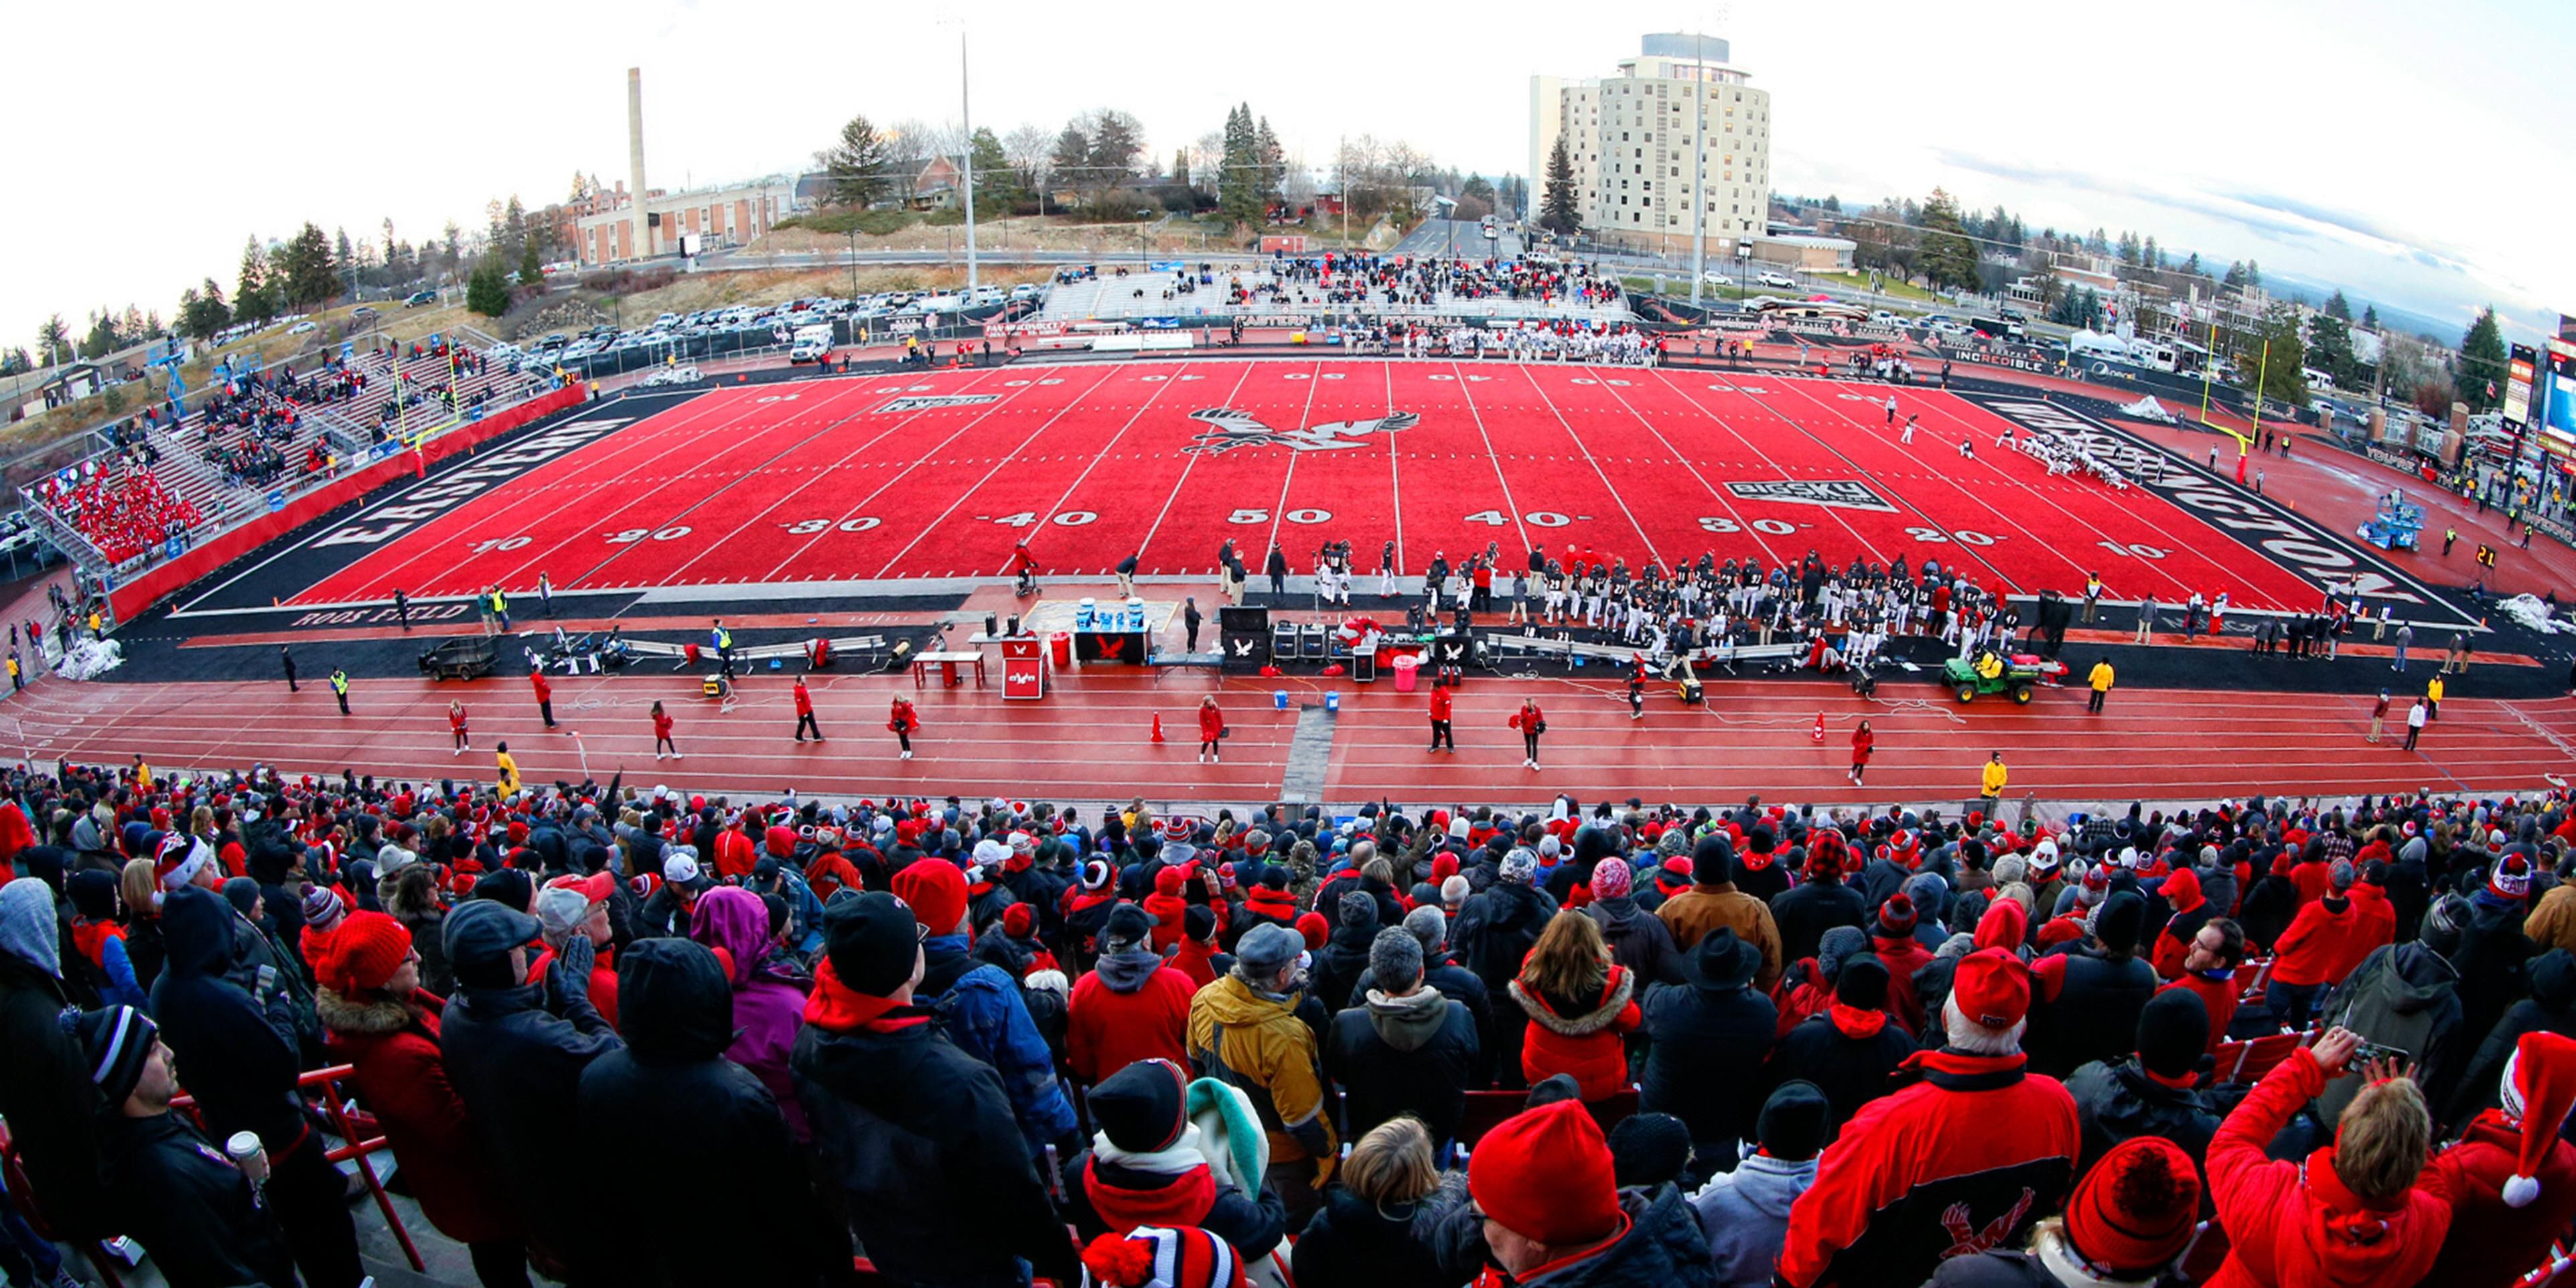 Located just two miles from EWU administration buildings and sports venues, we are easily accessible for returning alumni or parents to attend games on Roos Field or another sporting activity. We are also a great place for visiting professors as we also offer a shuttle for up to seven miles between the hours of 8 am-4 pm.